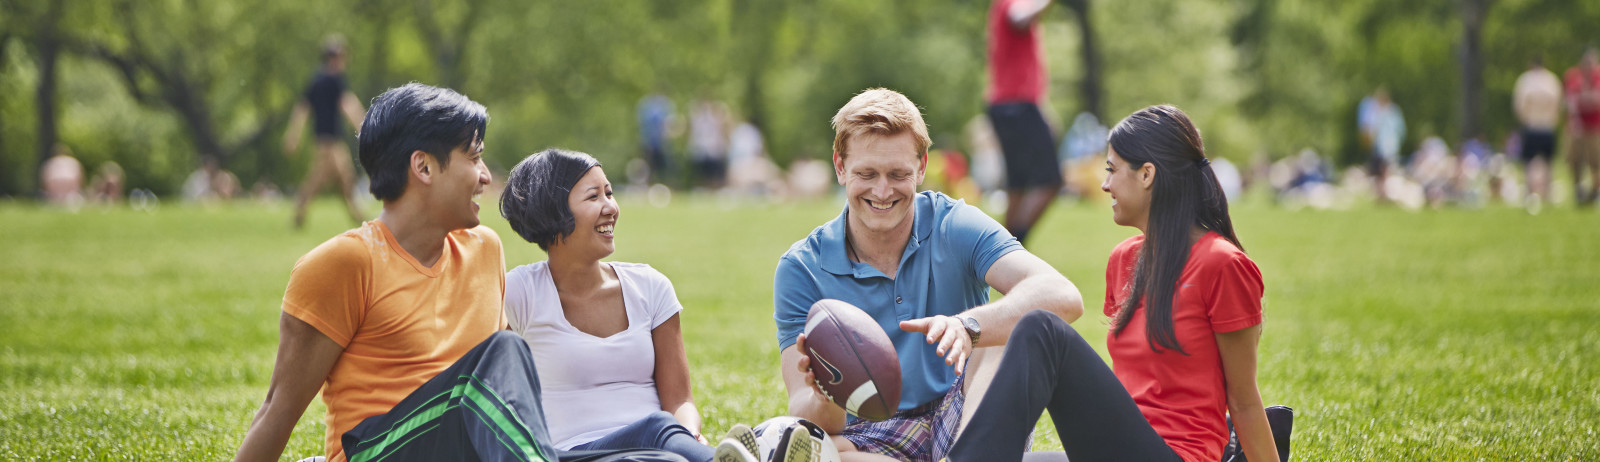 Two female and two male students have a casual talk sitting on the grass with a baseball and a football in a park